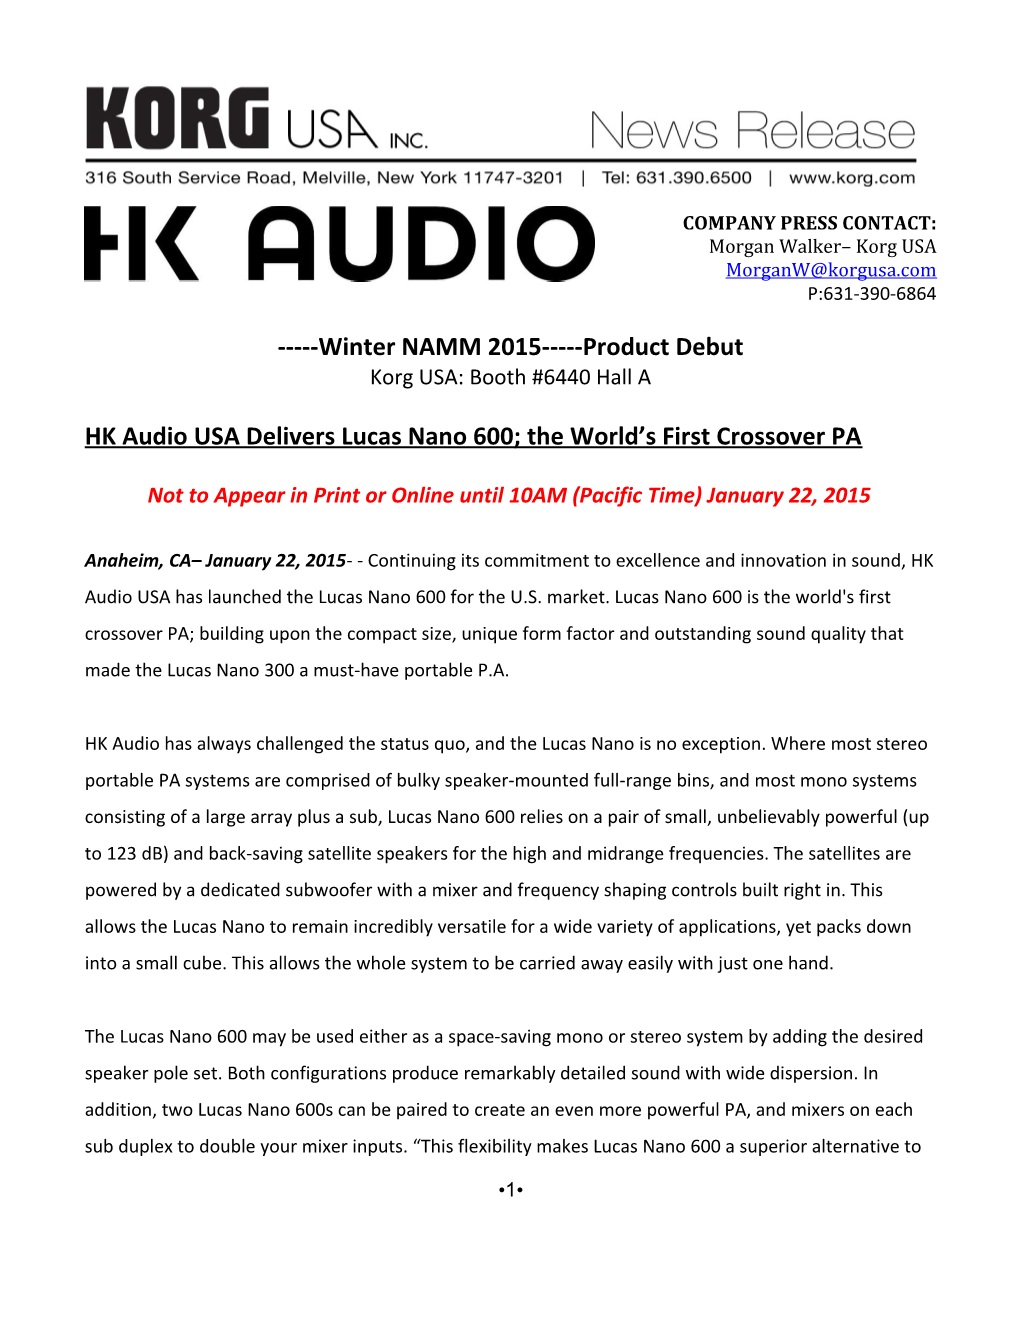 Winter NAMM 2015 Product Debut